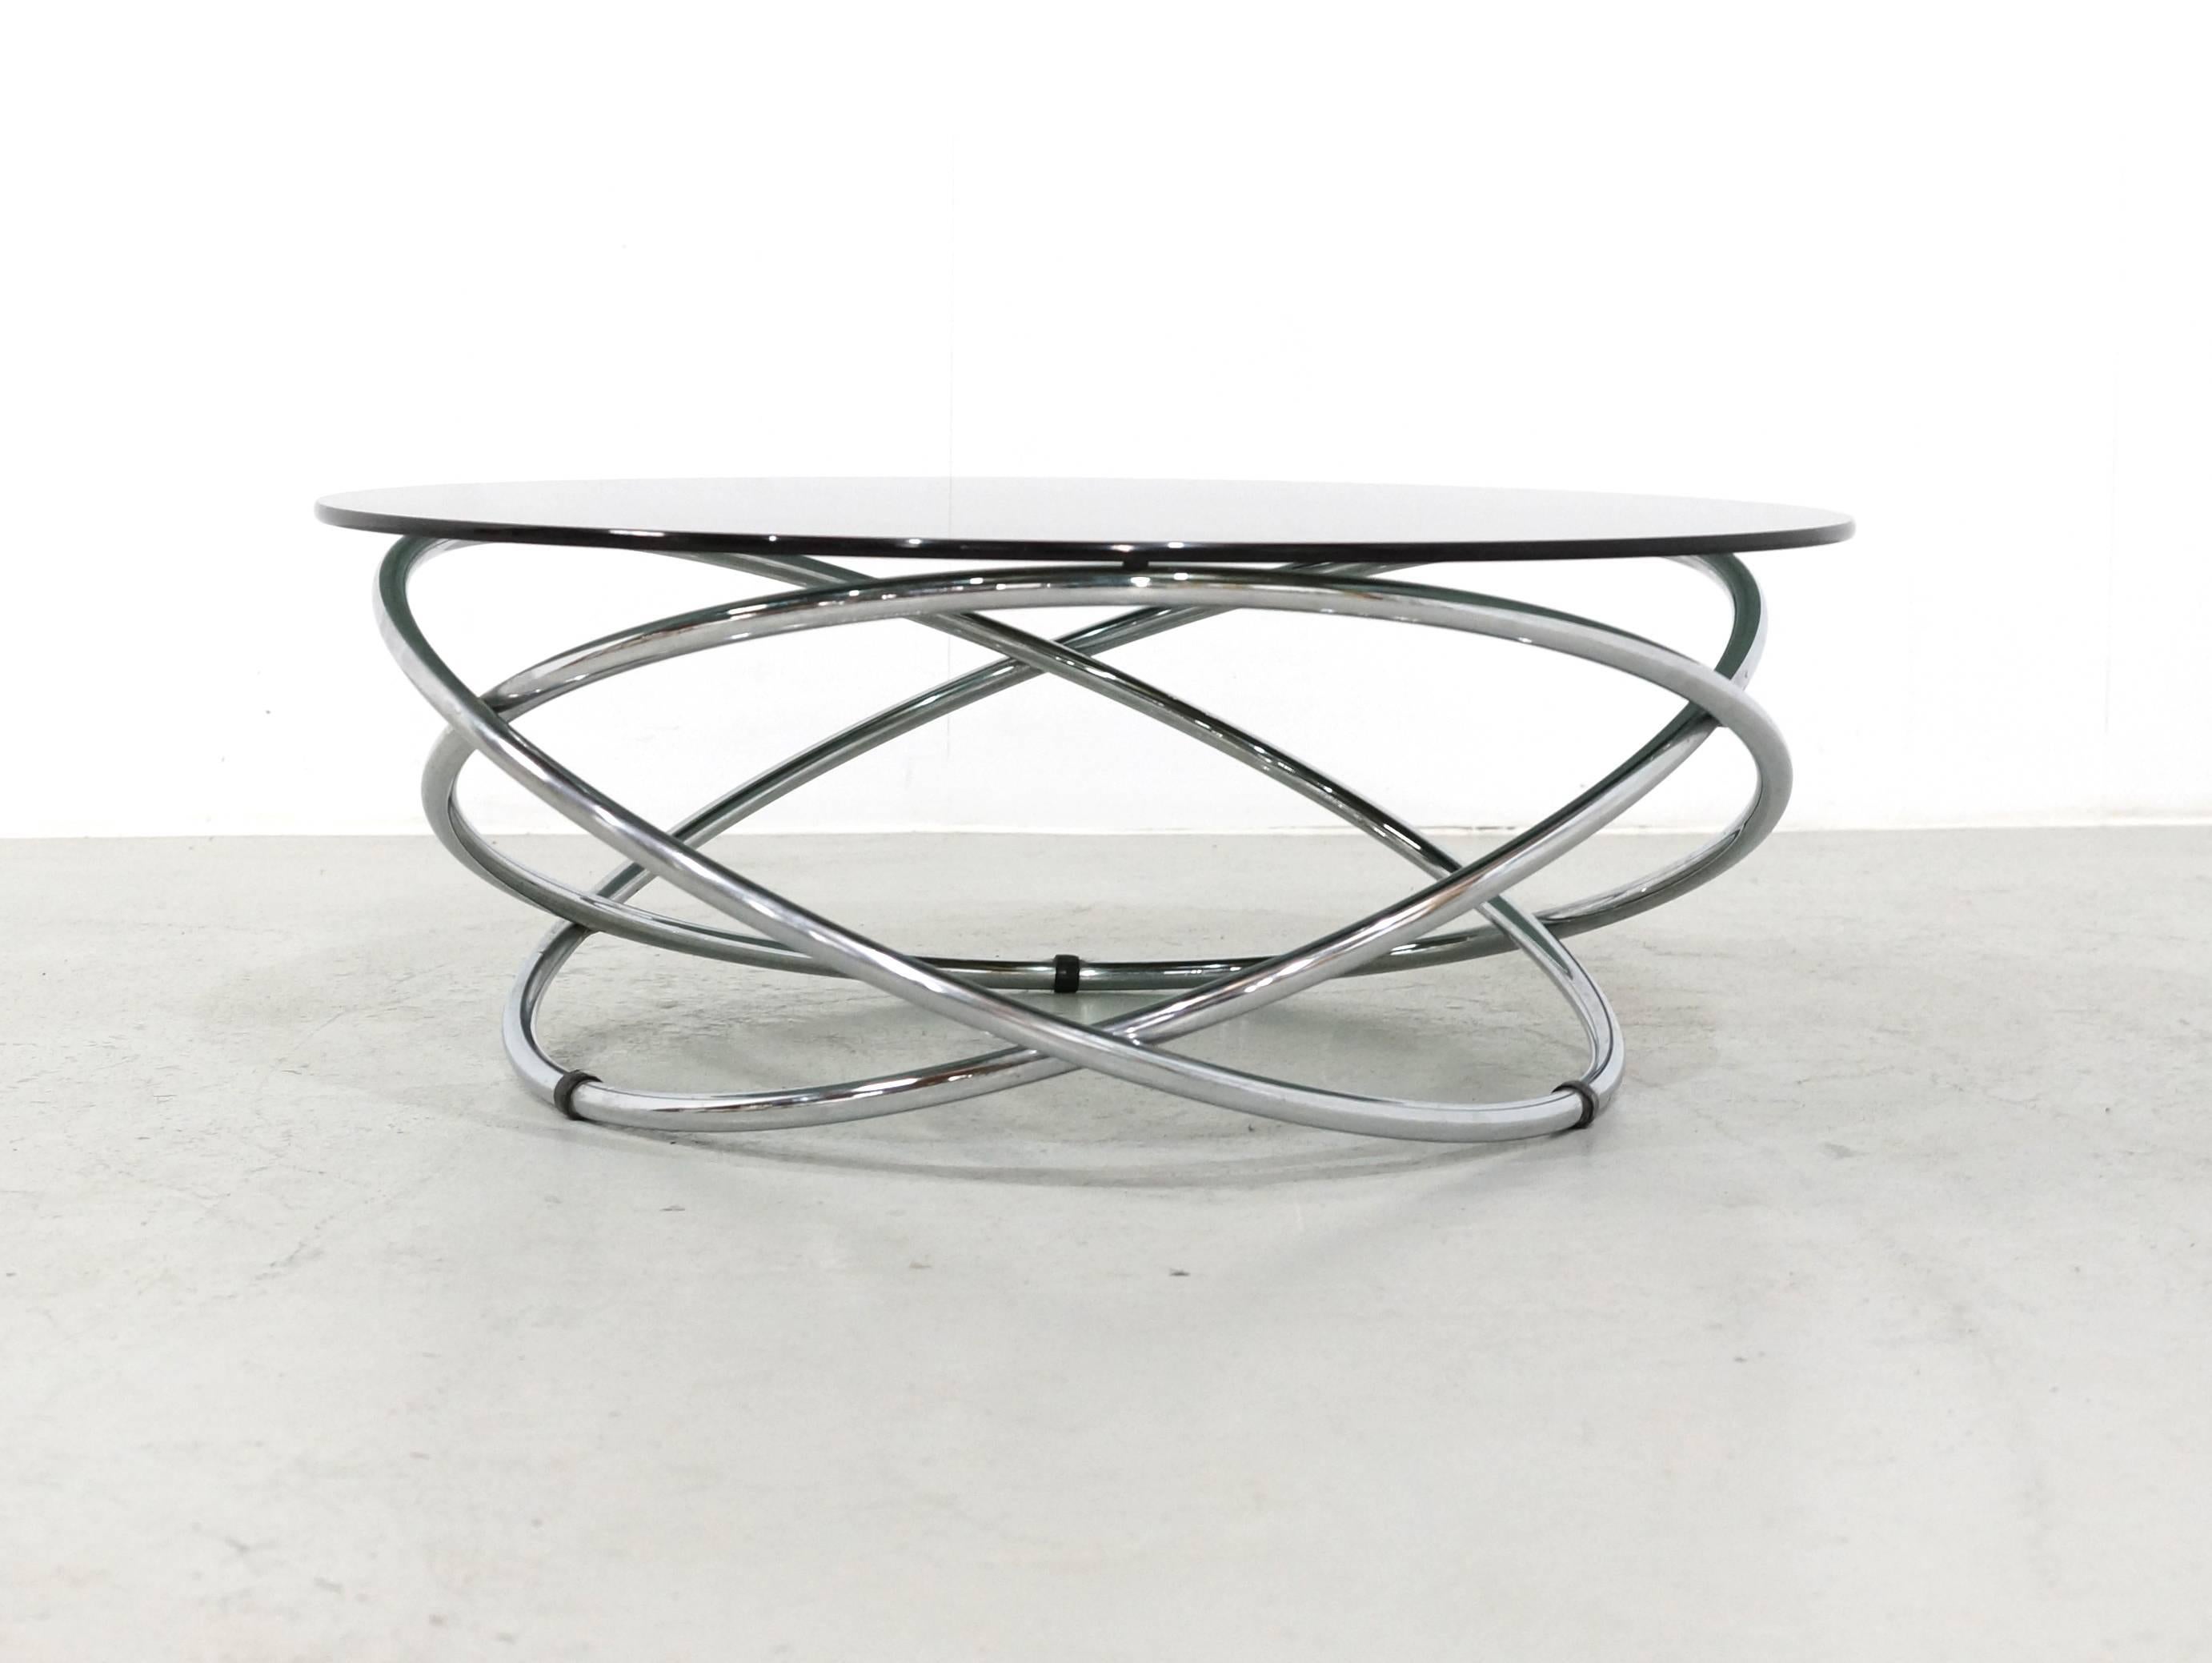 This beautiful Italian coffee could come out of one of the James Bond movies, crazy table with three hovering rings and a smoked glass top. This kind of Atomic style coffee tables are not very easy to find.
This Italian coffee table is in perfect